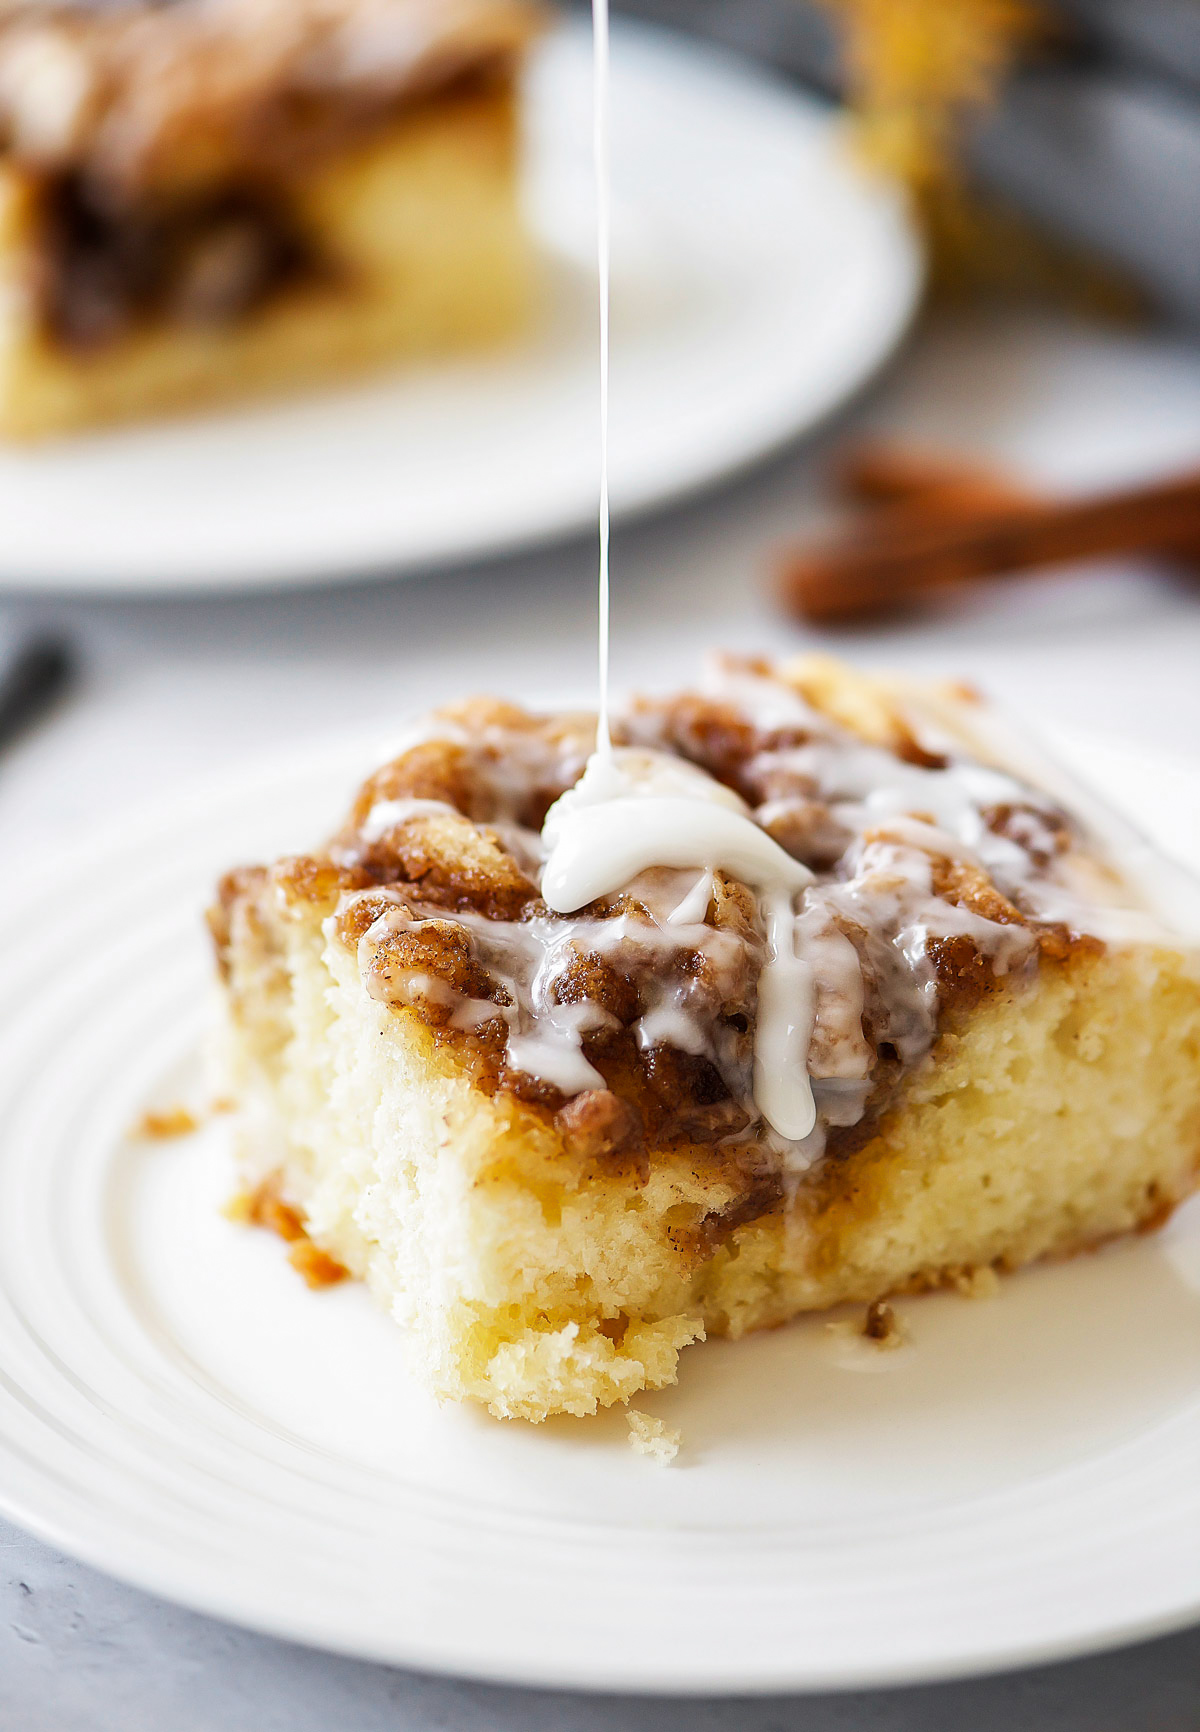 Cinnamon Roll Cake is a moist and buttery cinnamon cake with a creamy vanilla glaze drizzled over the top. Life-in-the-Lofthouse.com